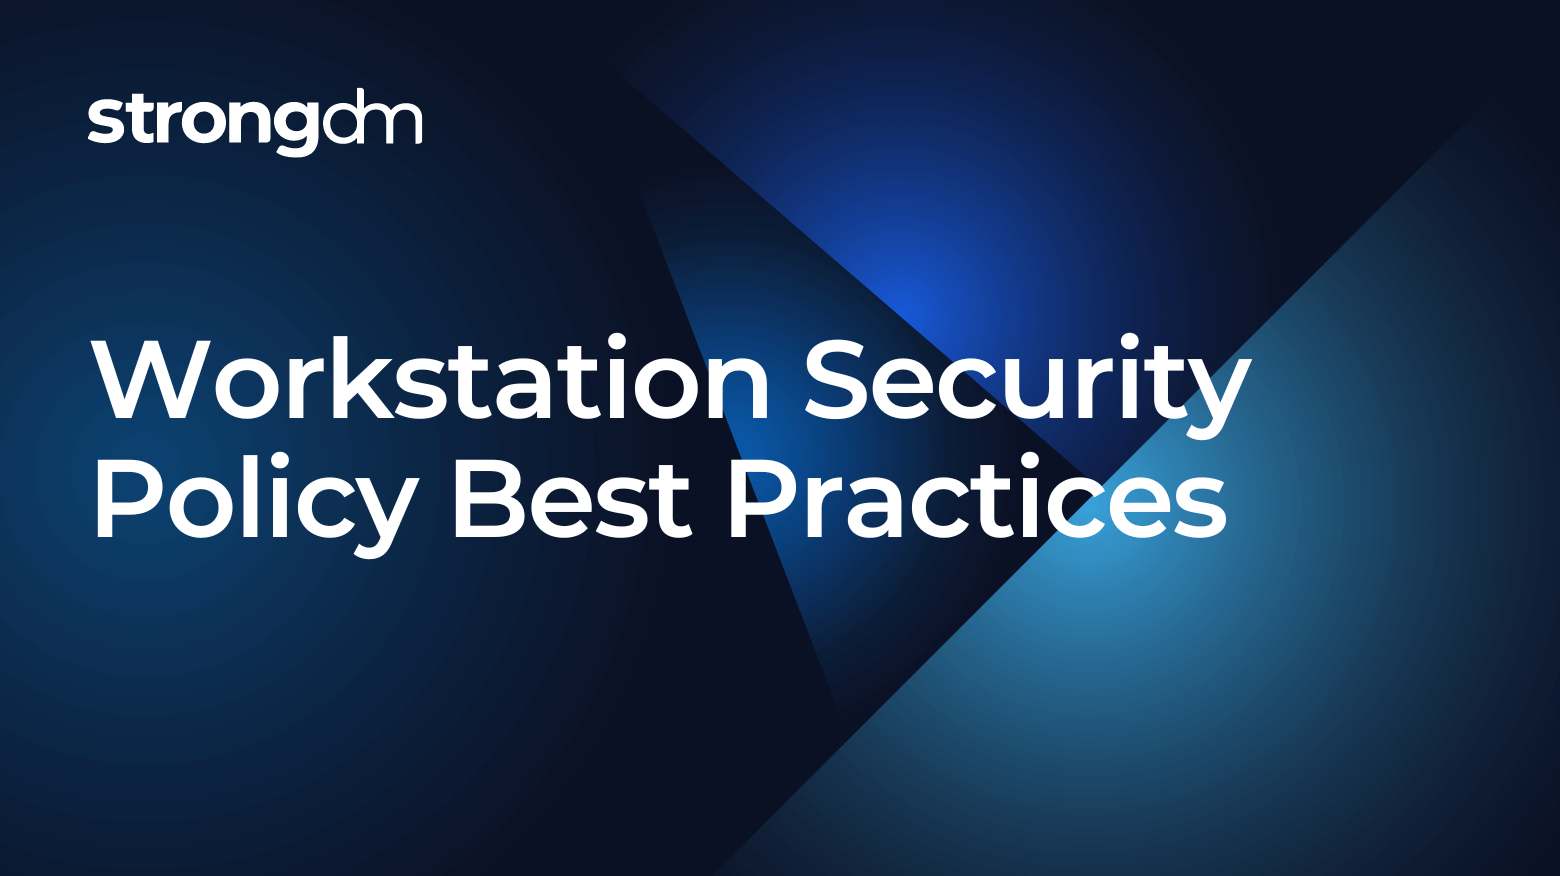 Workstation Security Policy Best Practices